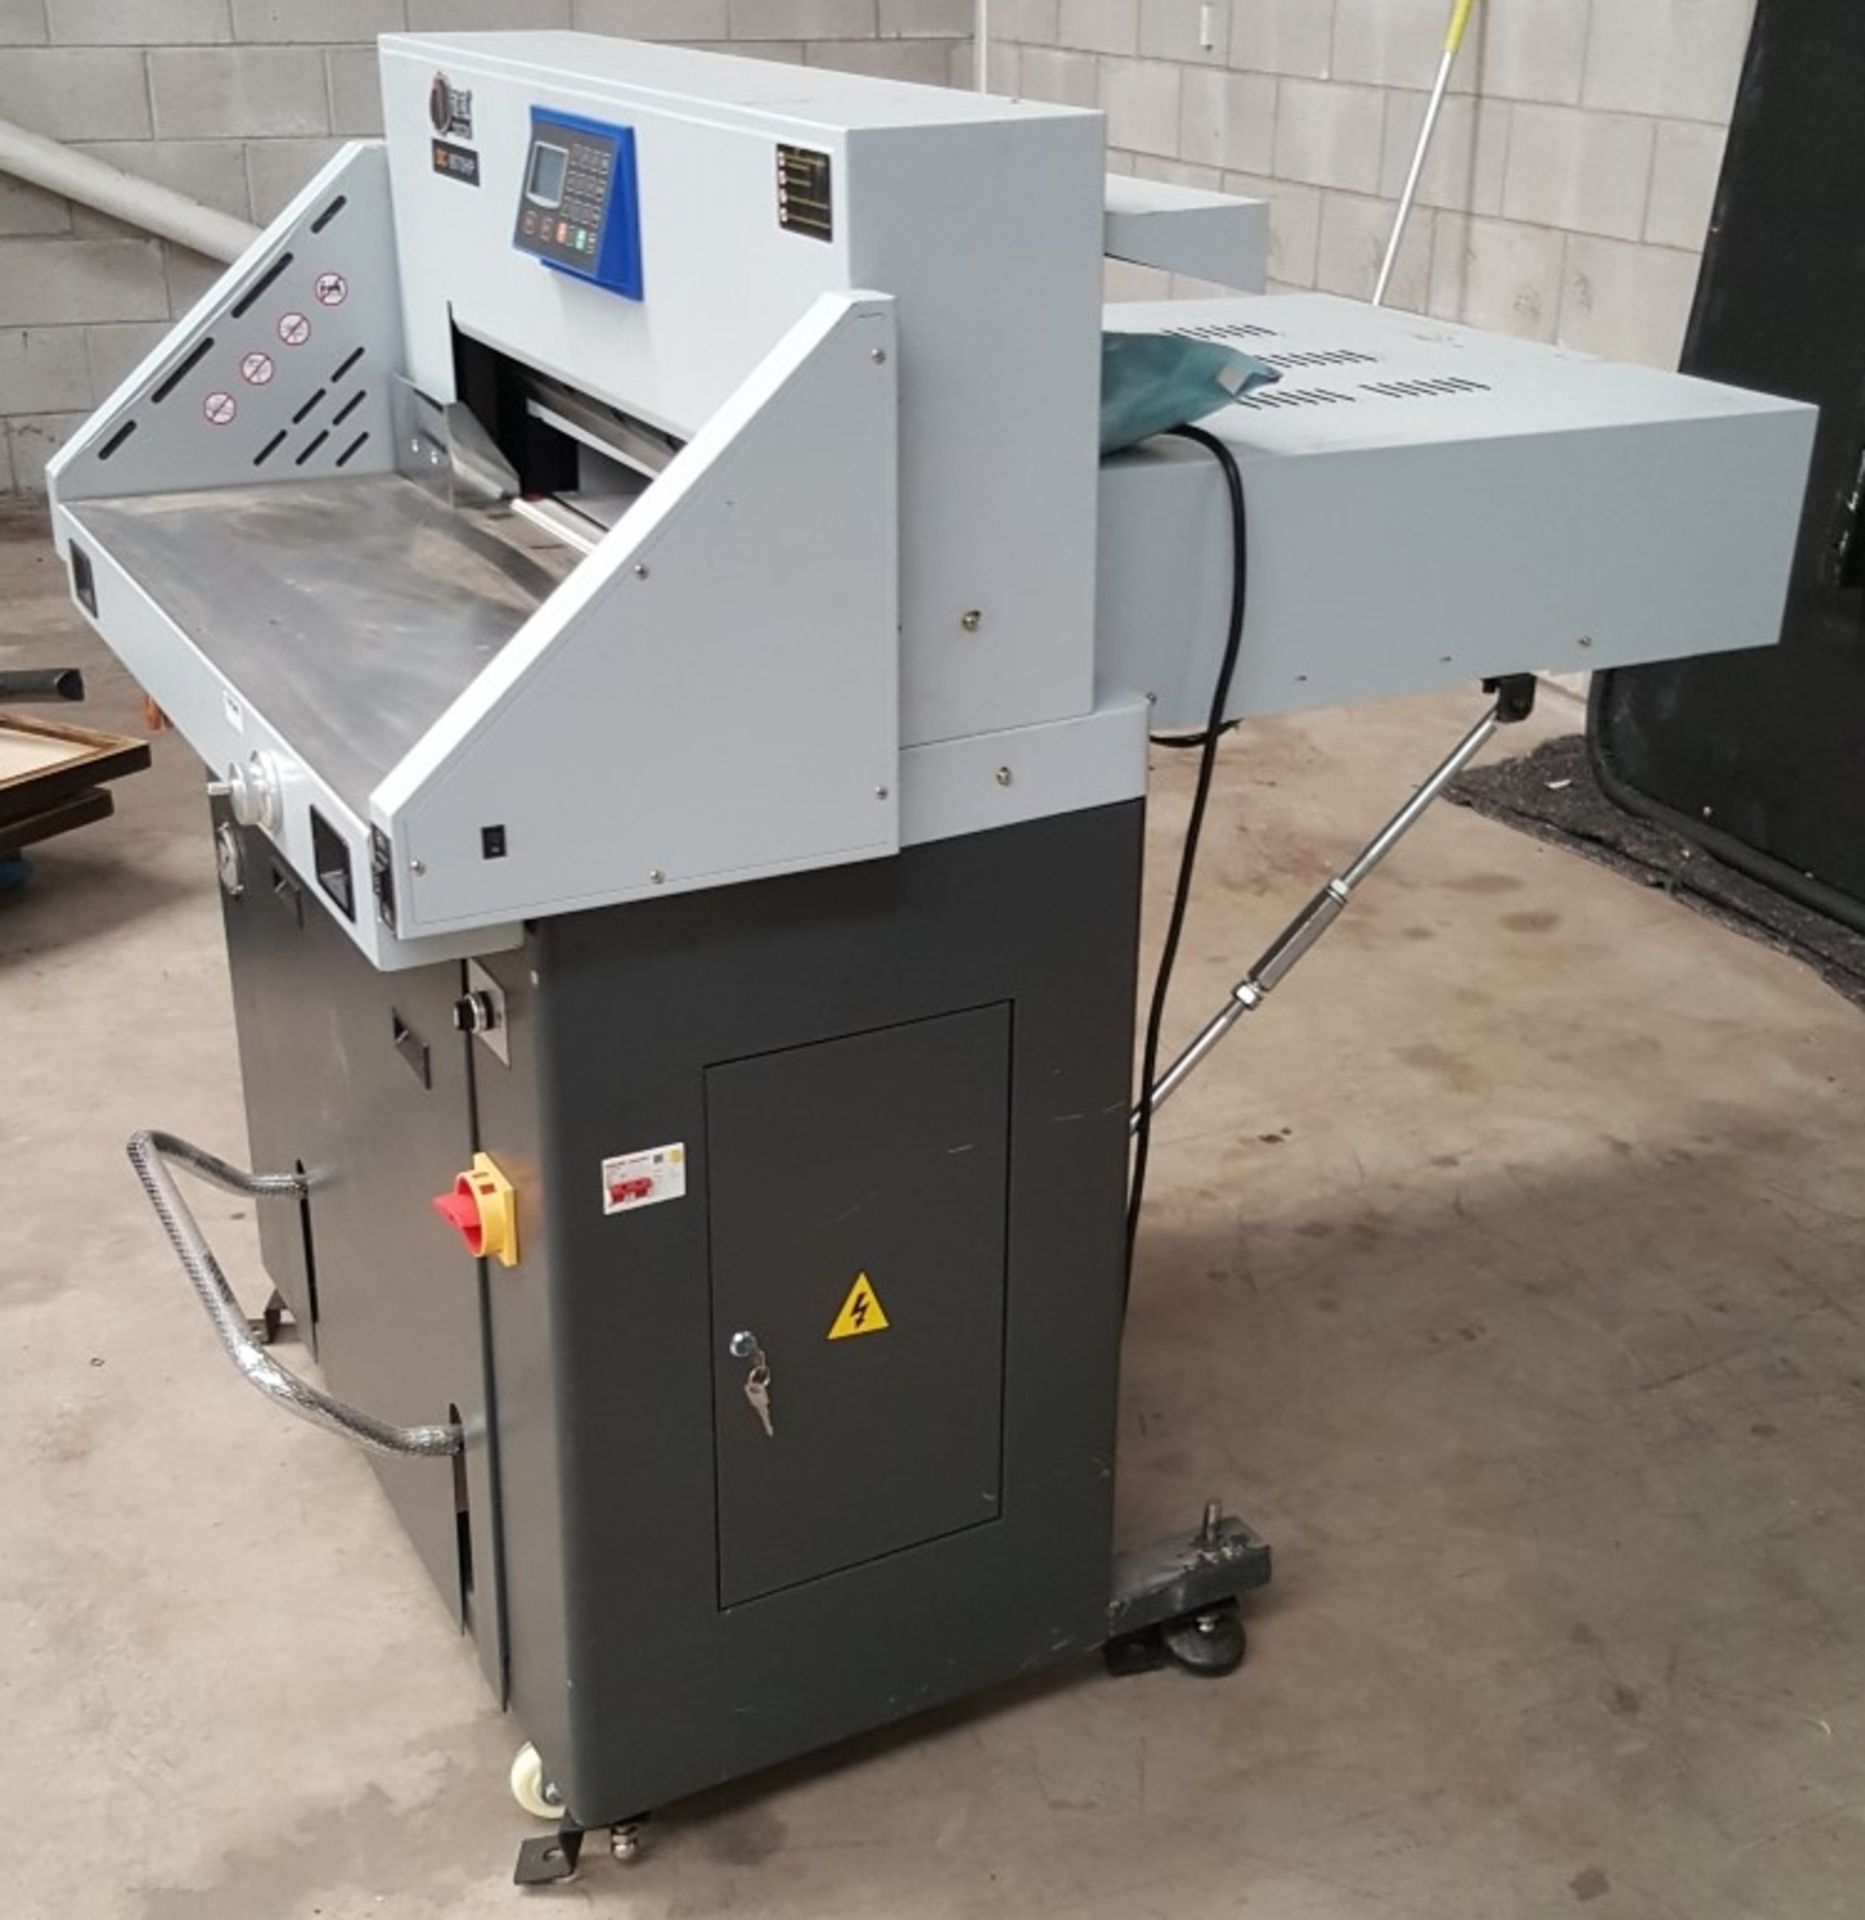 1 x Docon DC-8670HP Hydraulic Paper Guillotine - Heavy Duty Paper Cutting Machine - Image 3 of 10